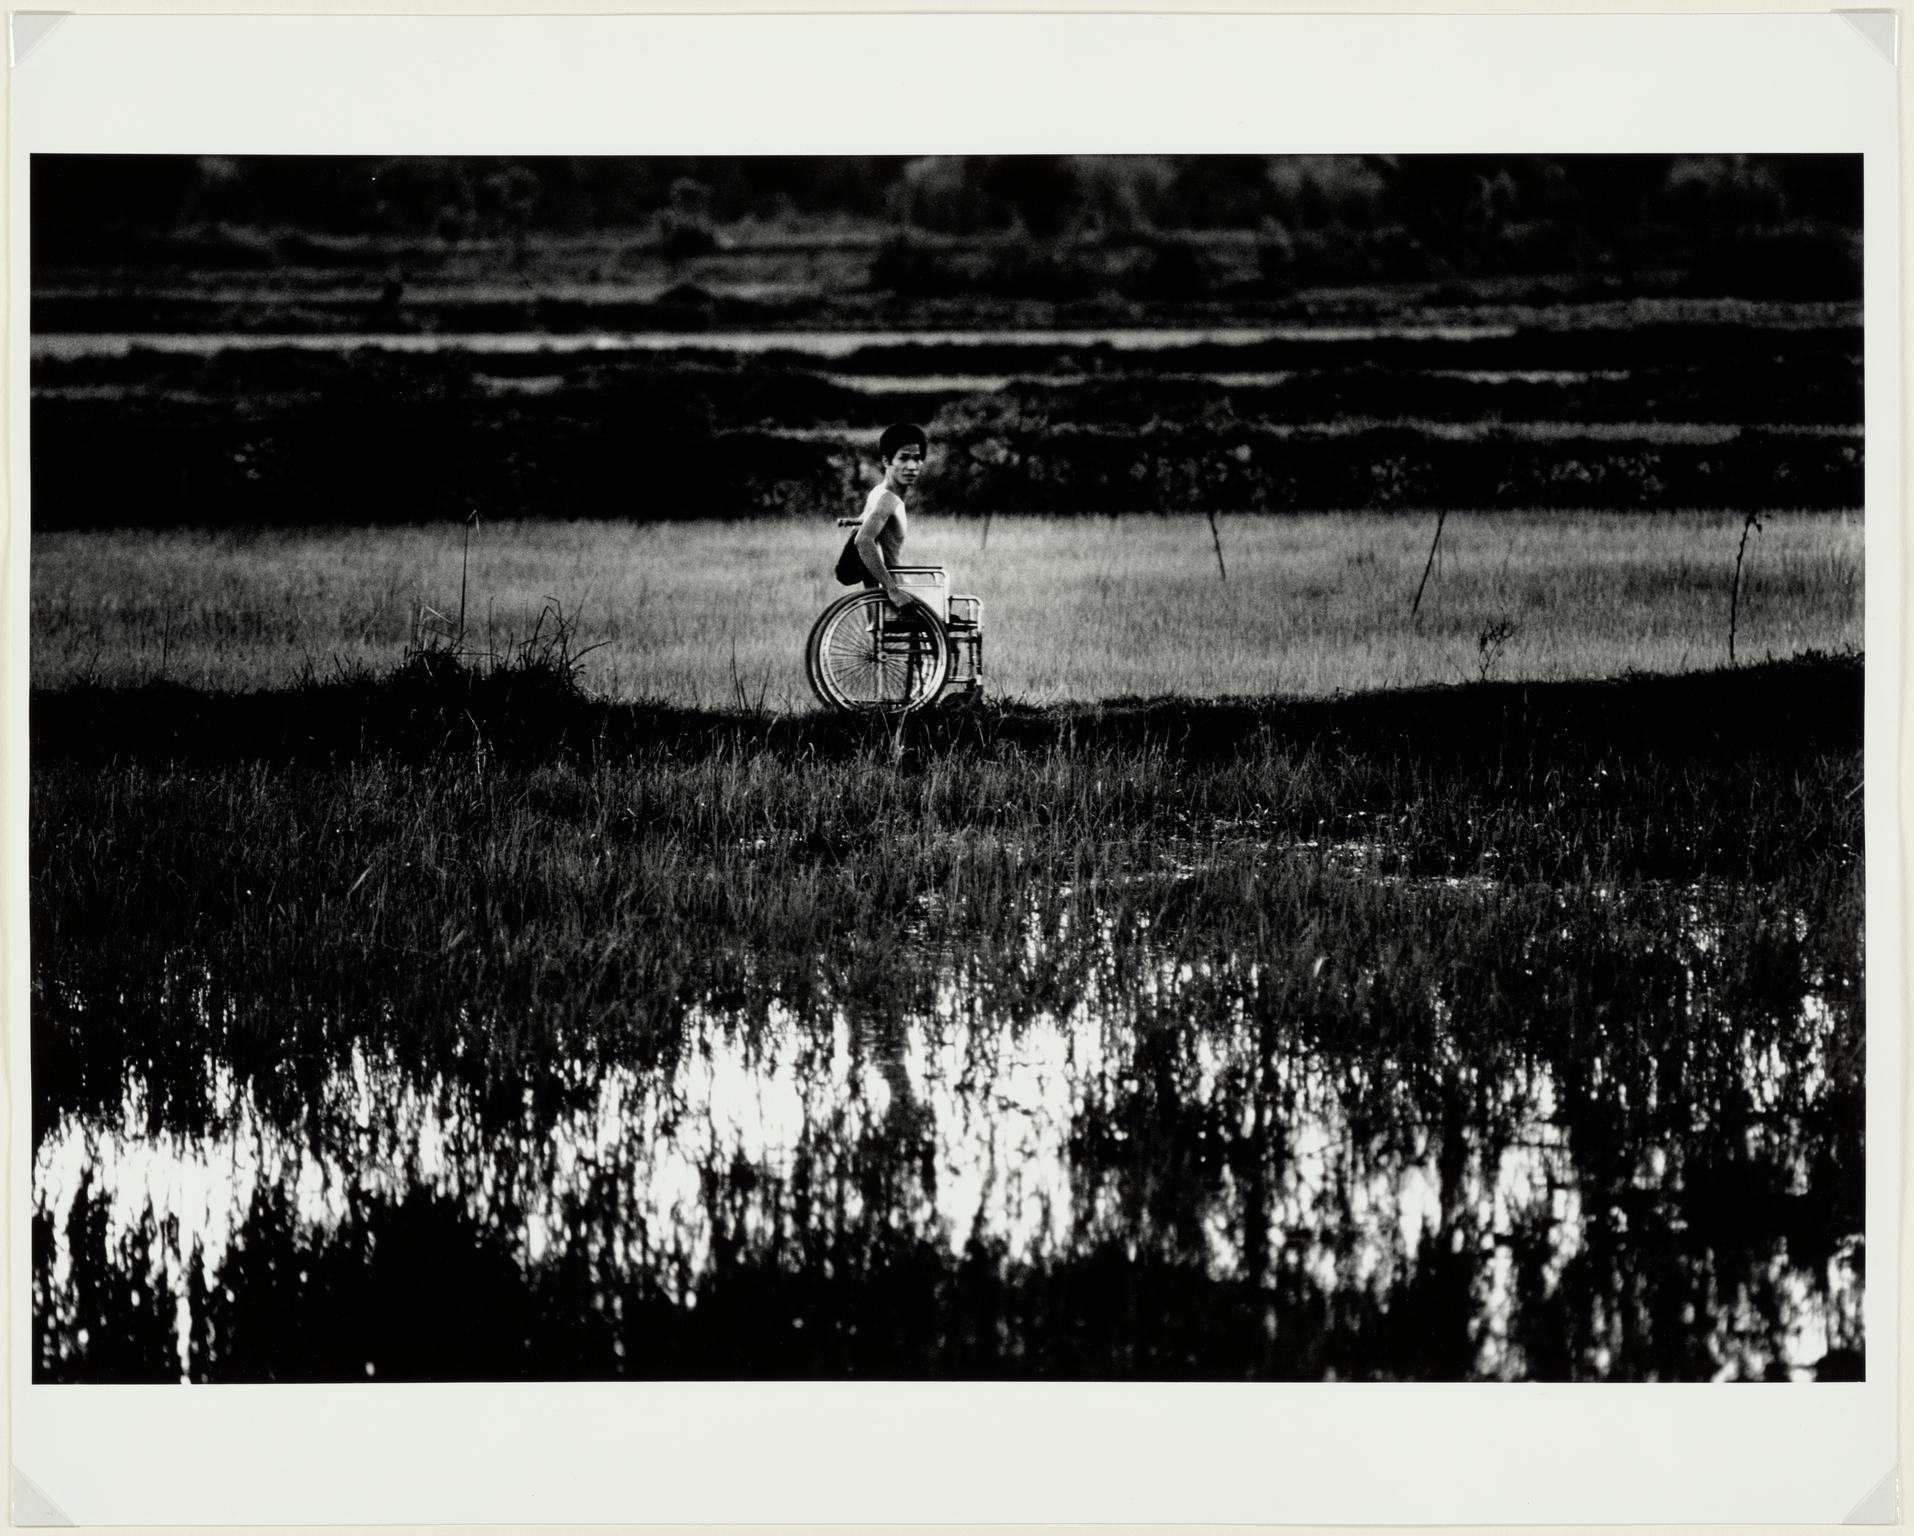 Amputee in rice field, 1967